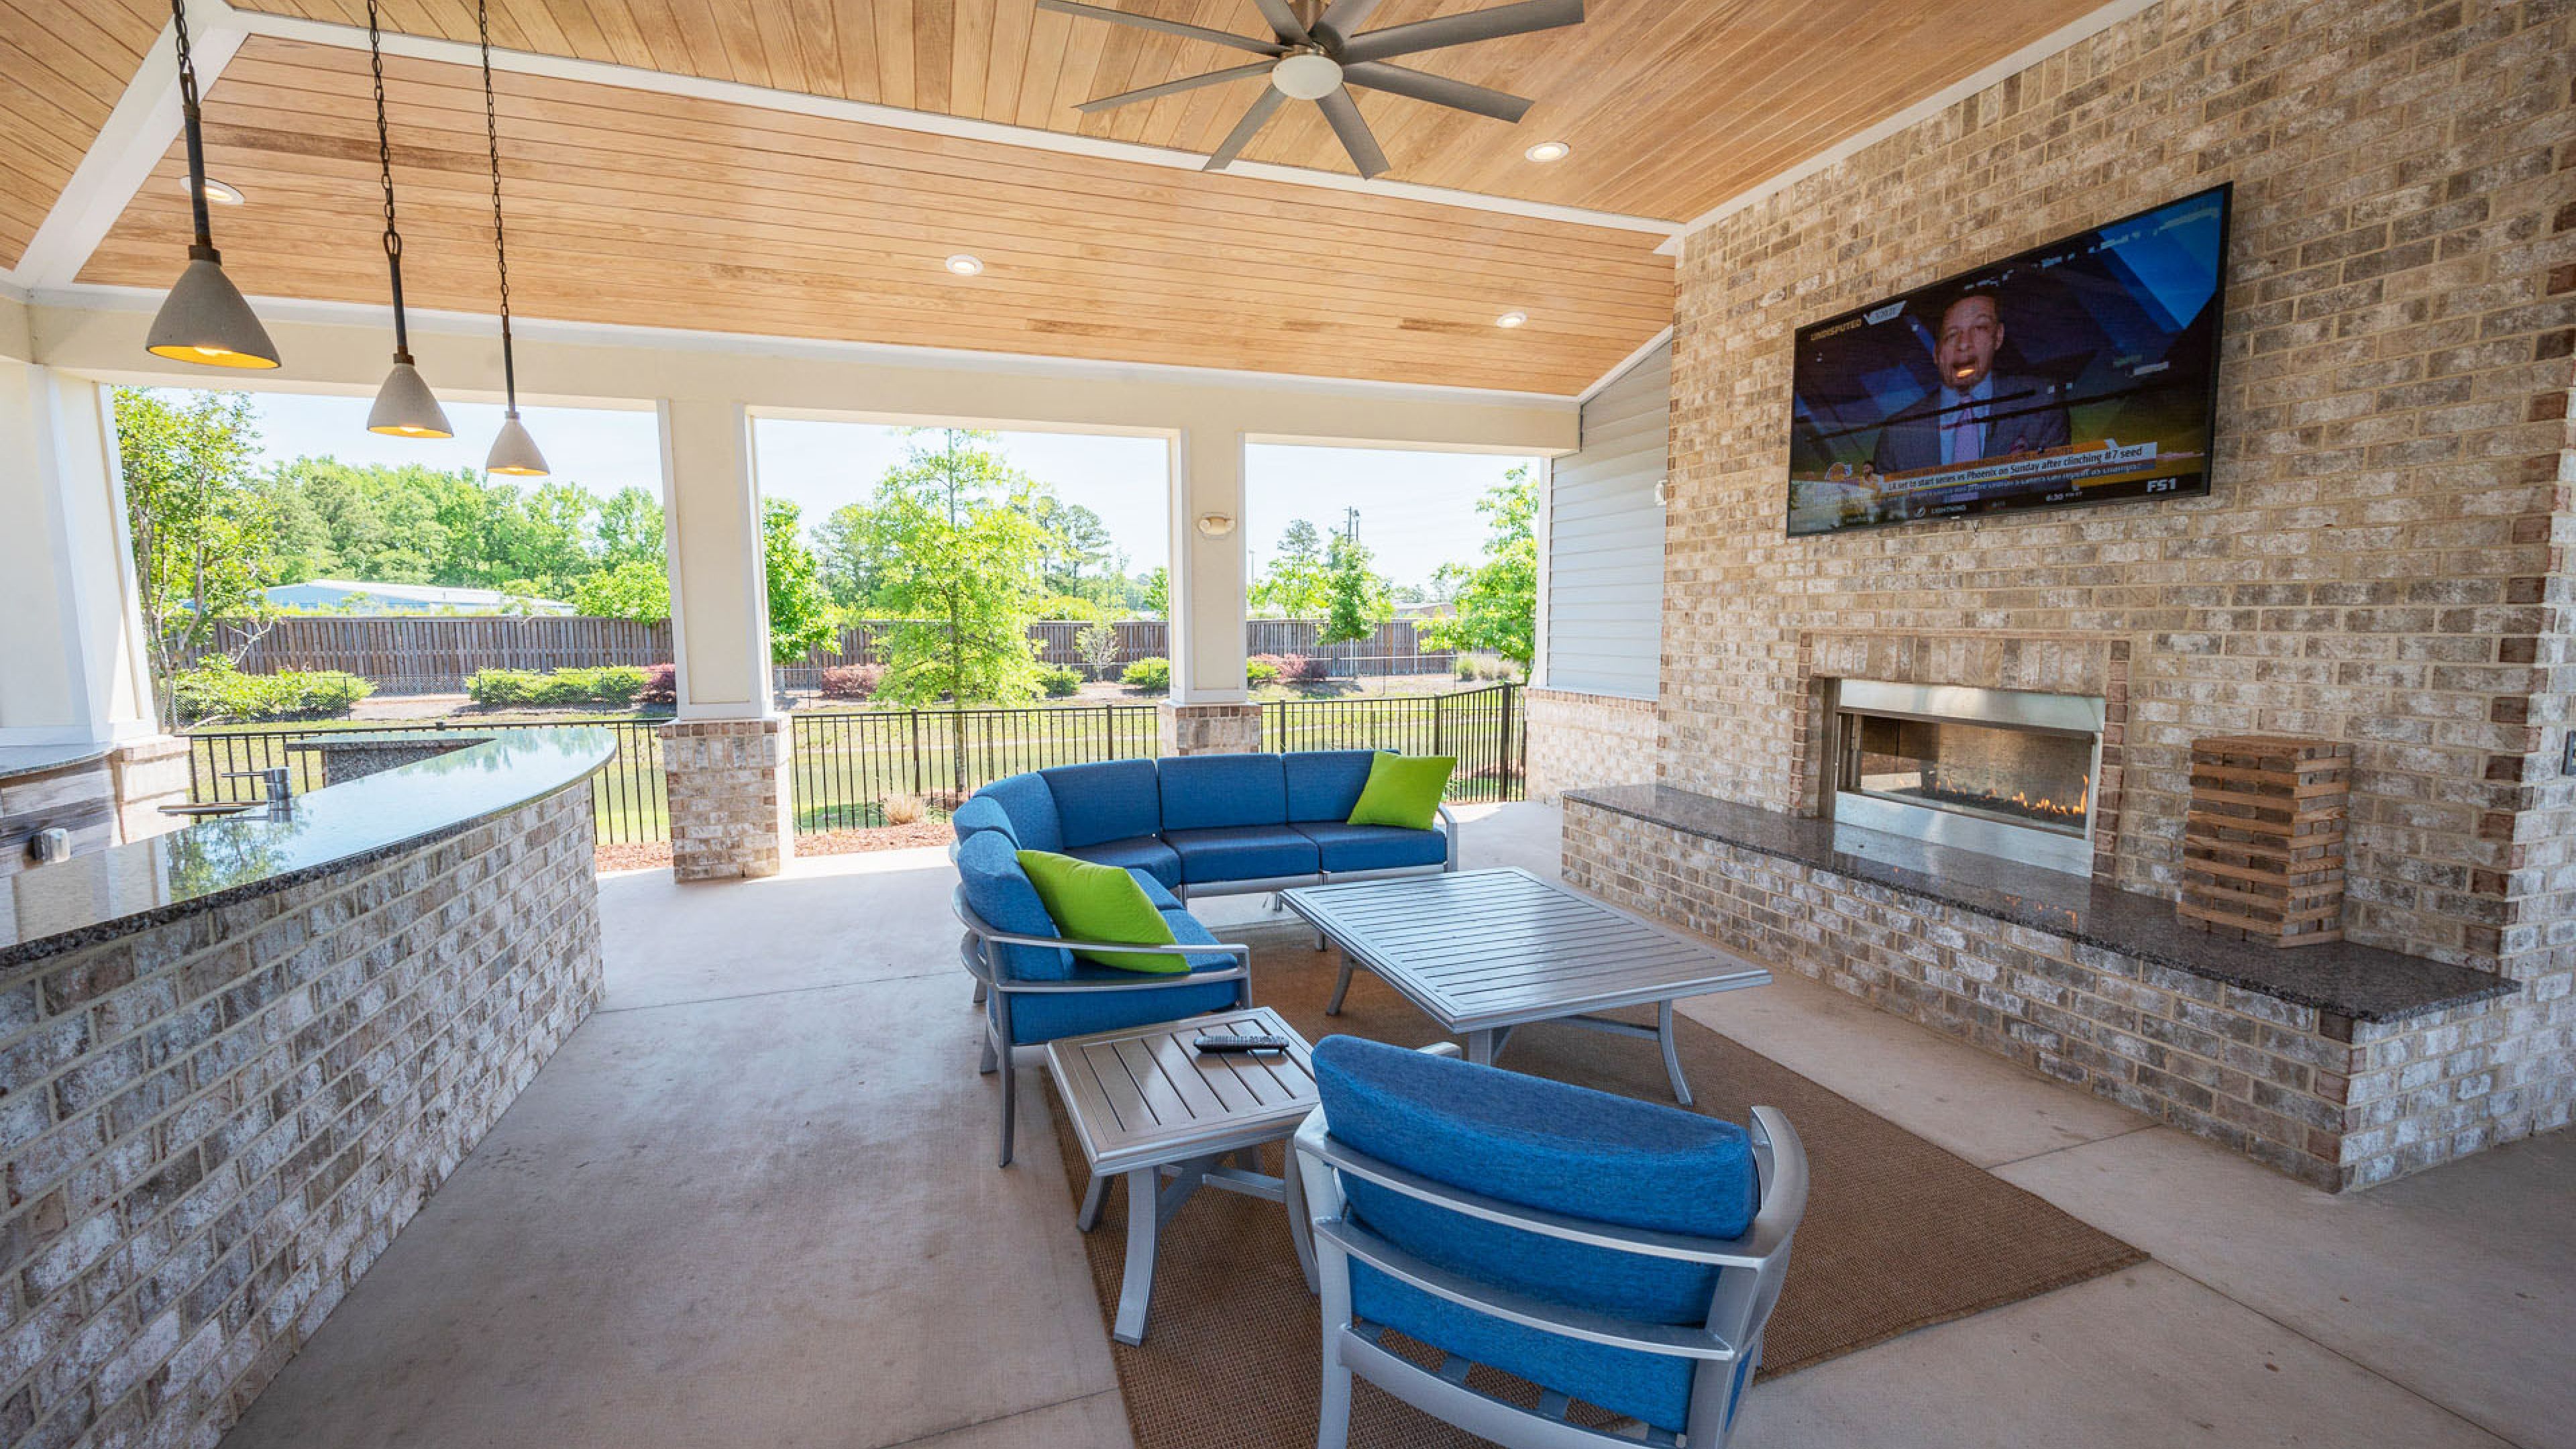 Hawthorne at Leland outdoor amenity lounge area with fireplace and entertainment space with kitchen